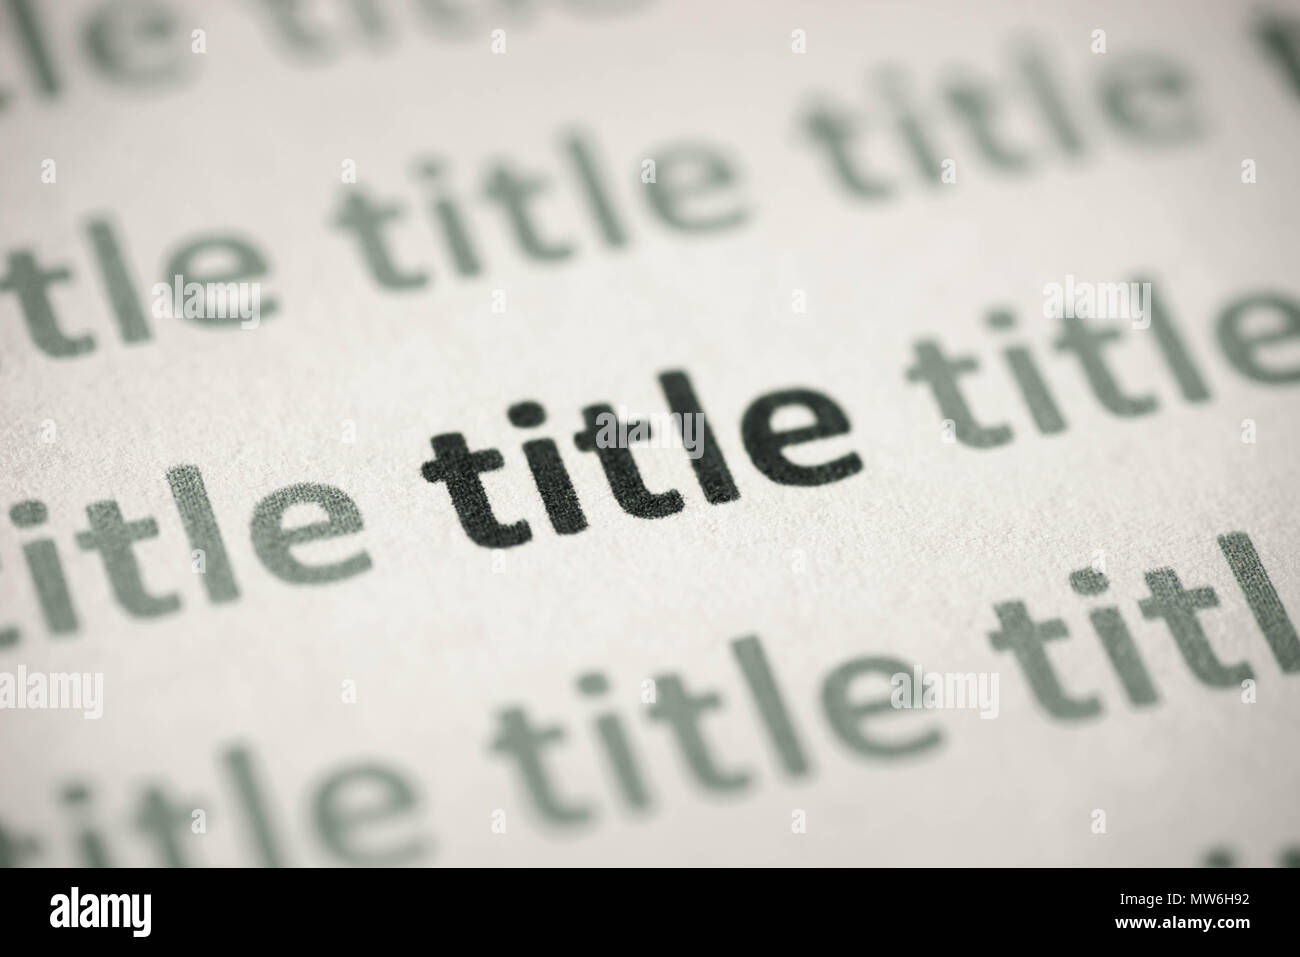 word title printed on white paper macro Stock Photo